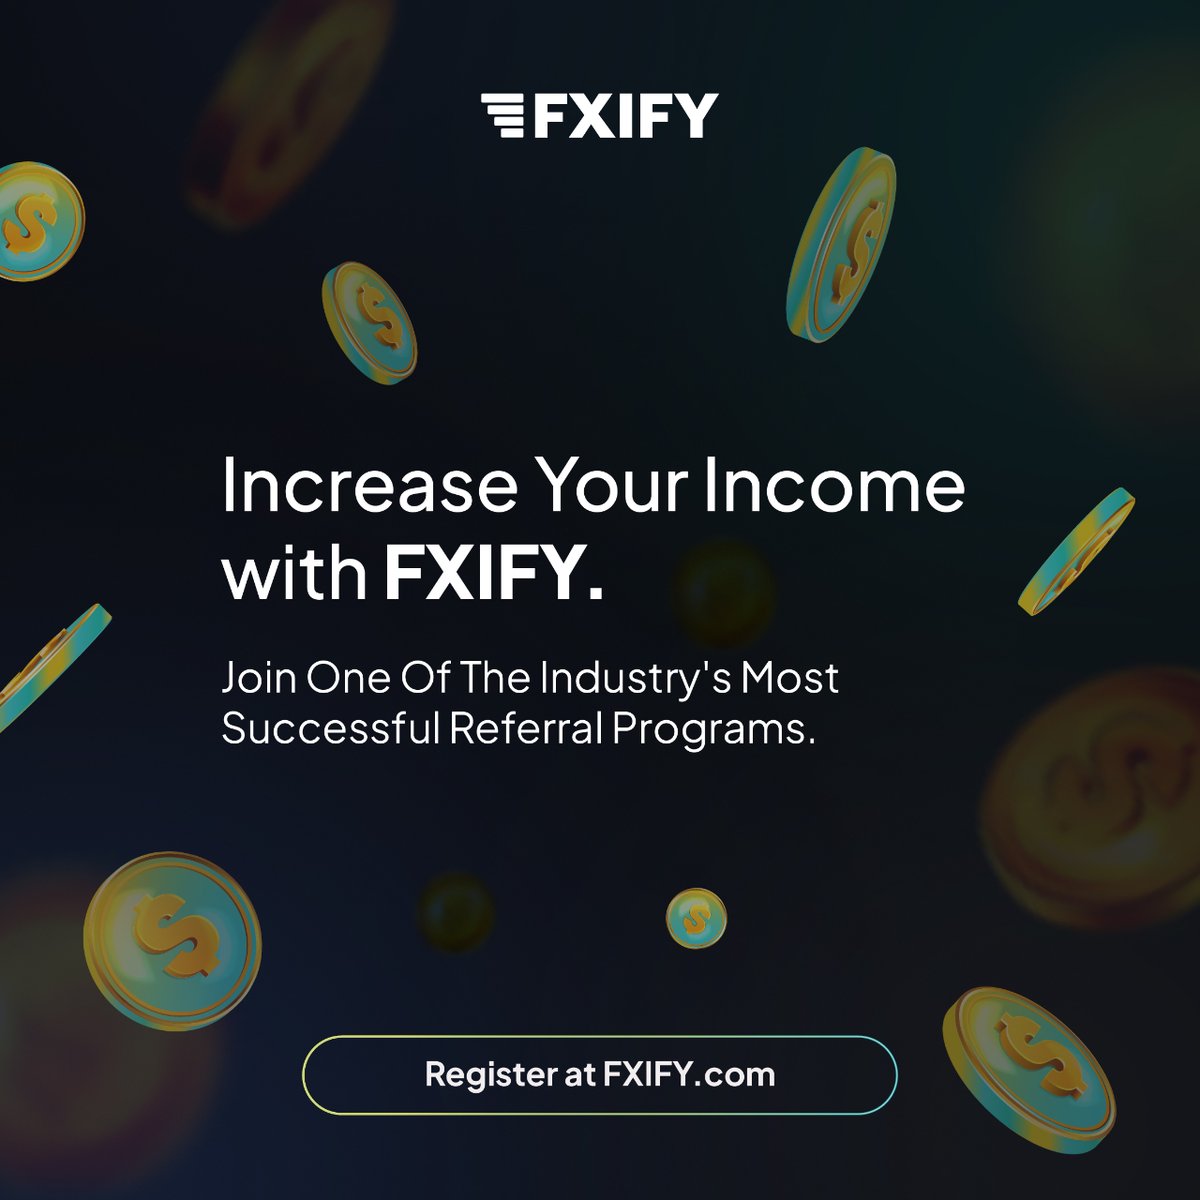 Earn up to 20% commission by referring traders to FXIFY, the prop firm with funded accounts up to $400,000! Click to learn more and join the industry's leading affiliate program! ➡️ Learn More: fxify.com/become-a-partn…